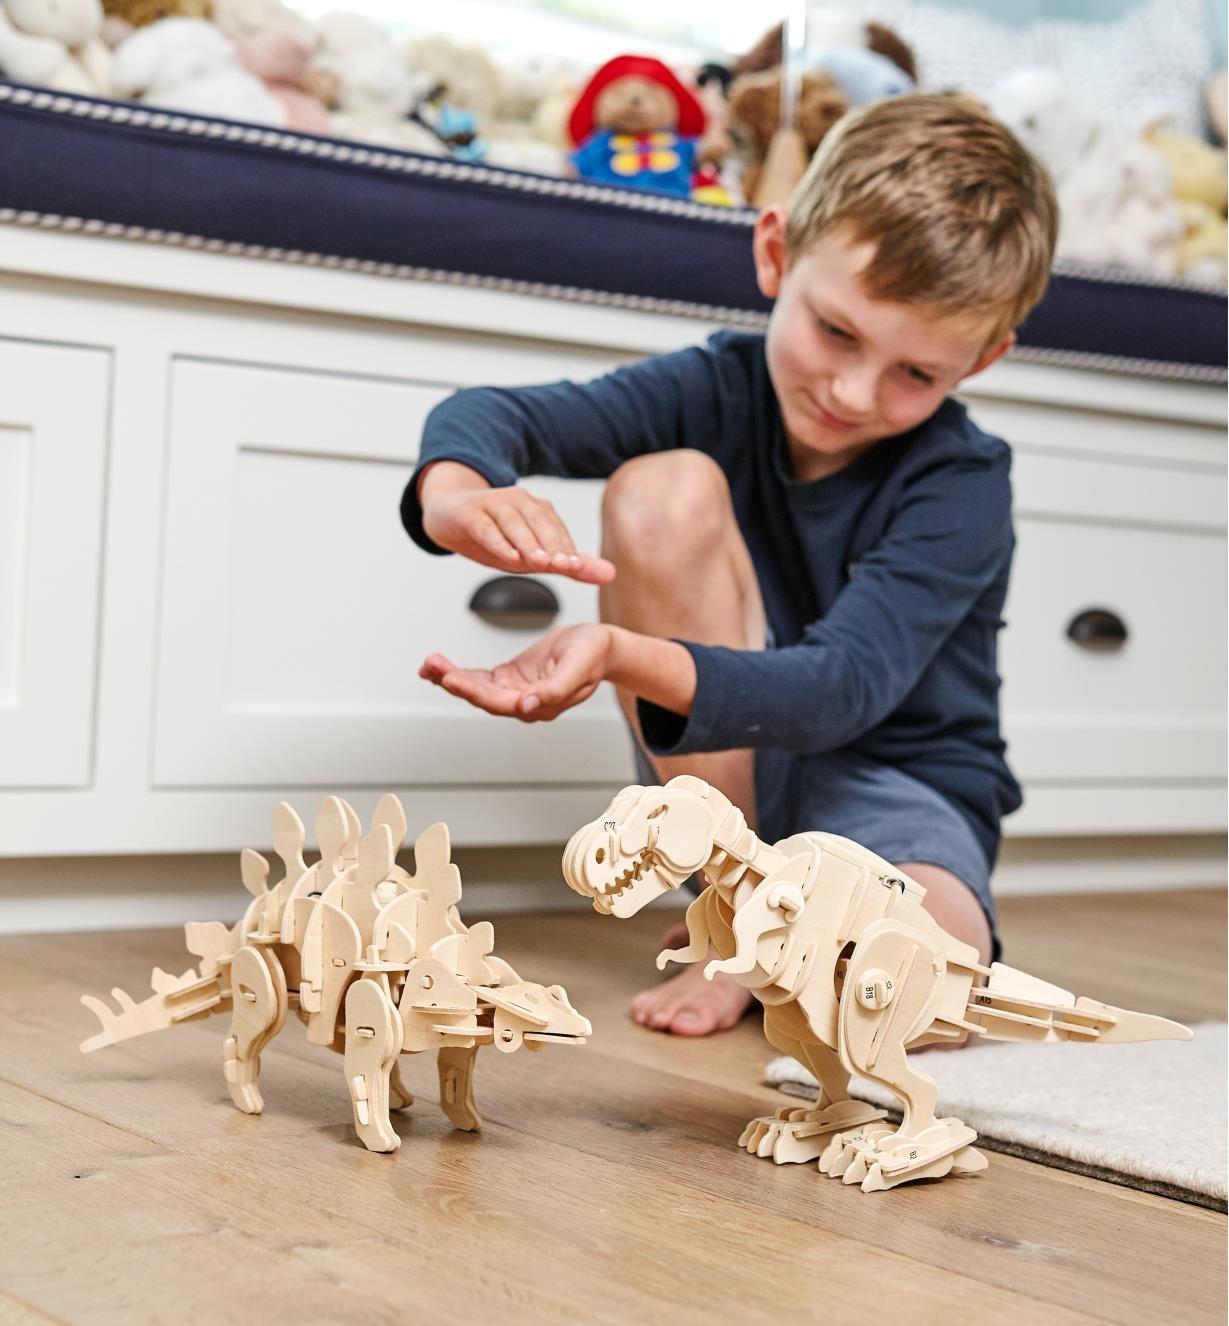 A boy claps his hands to activate the assembled walking dinosaur models